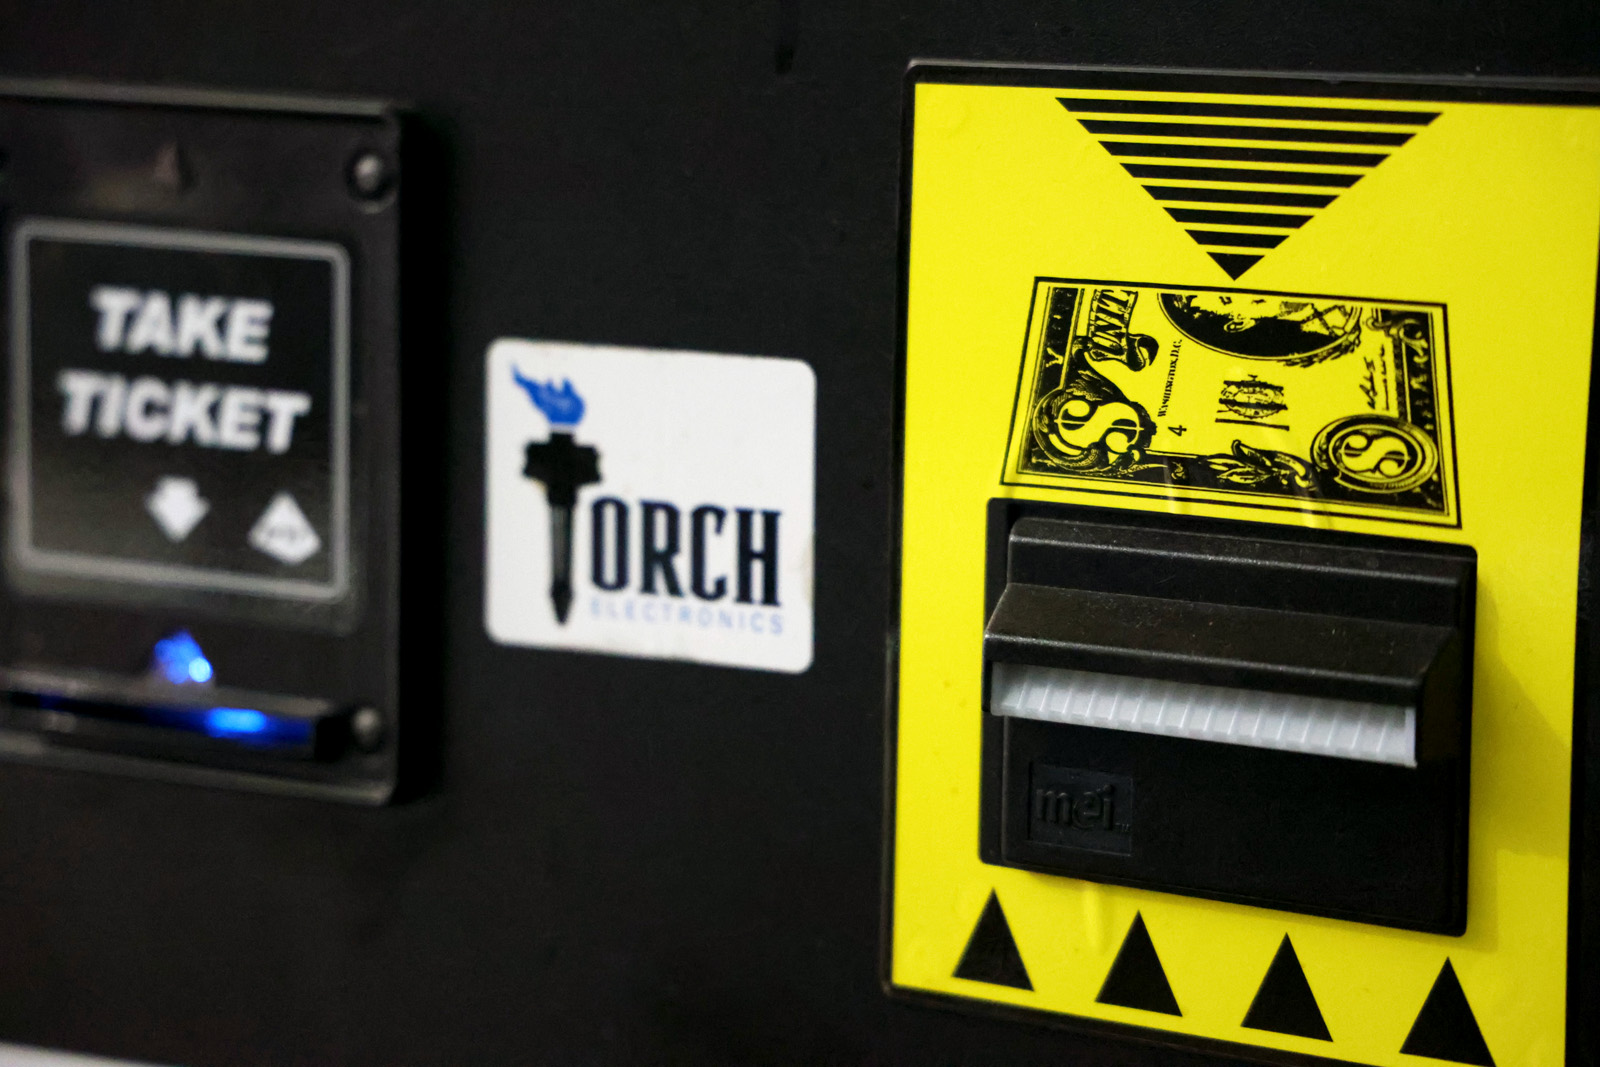 Torch Electronics says machines don't violate Springfield VLT ban